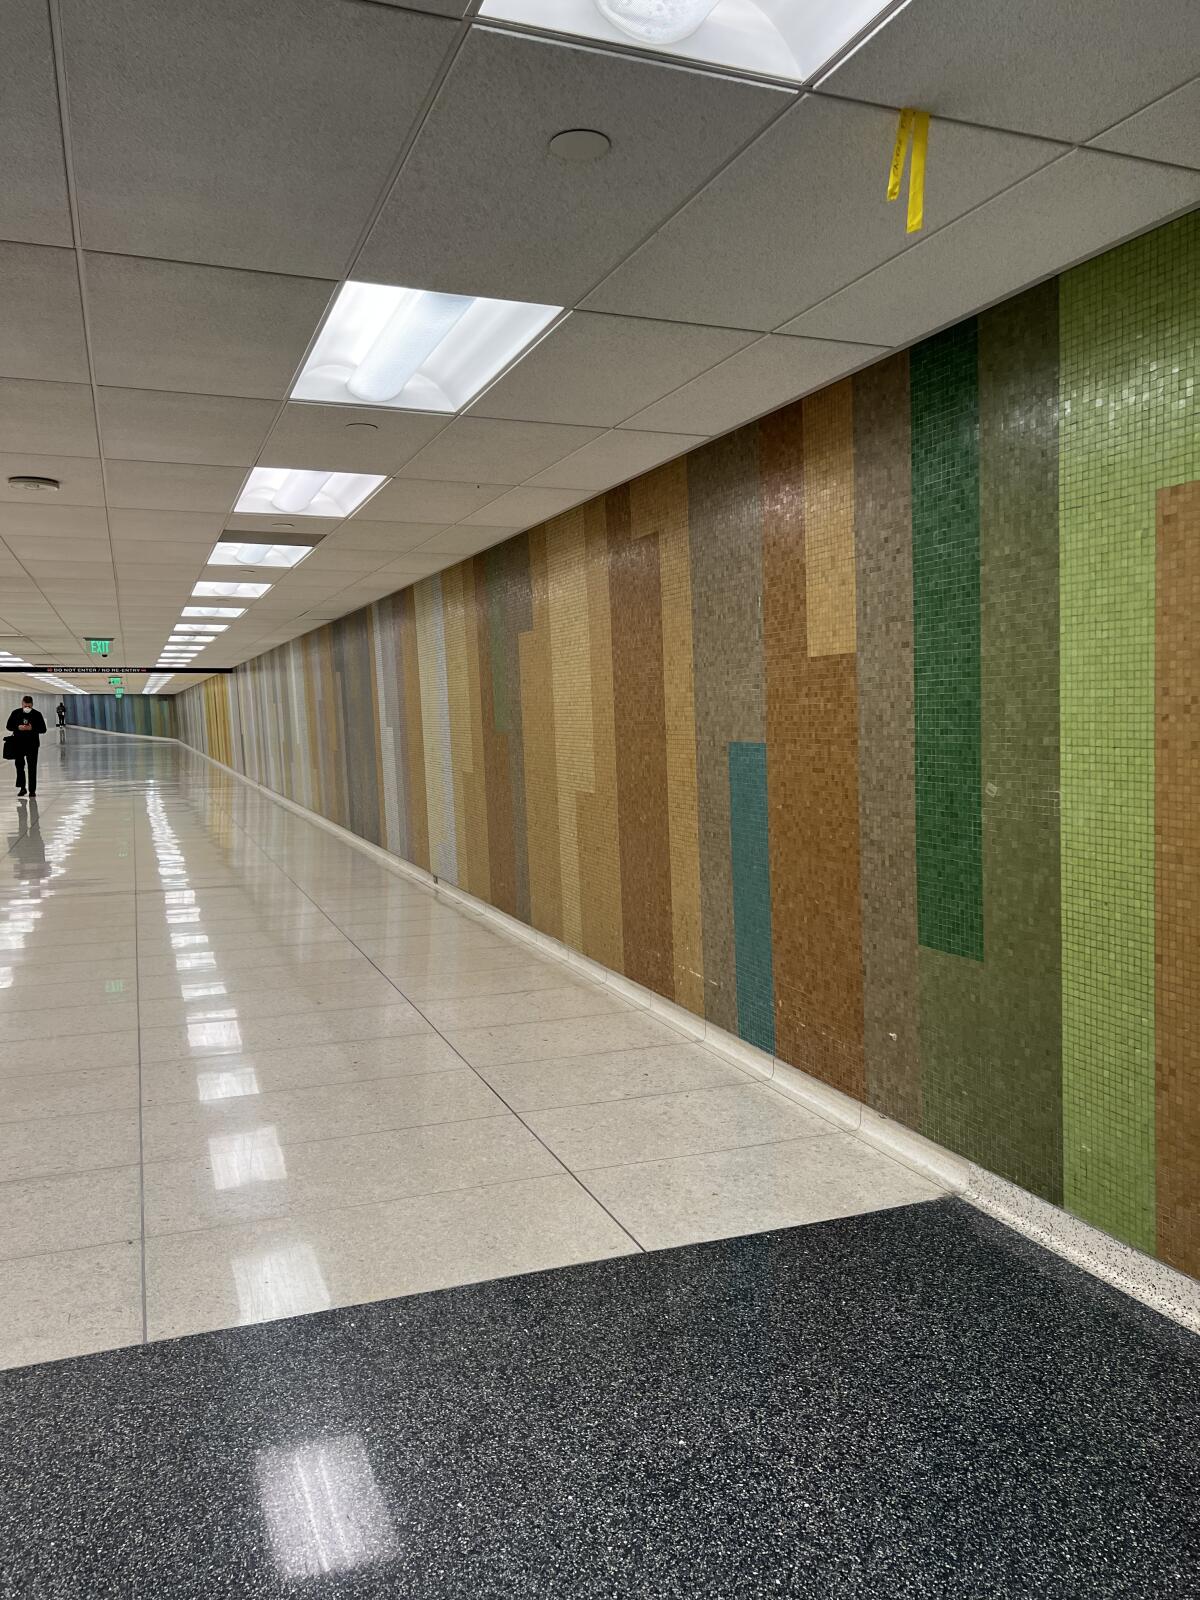 A wall made up of green and brown mosaic tiles in a florescent-lit hallway at LAX